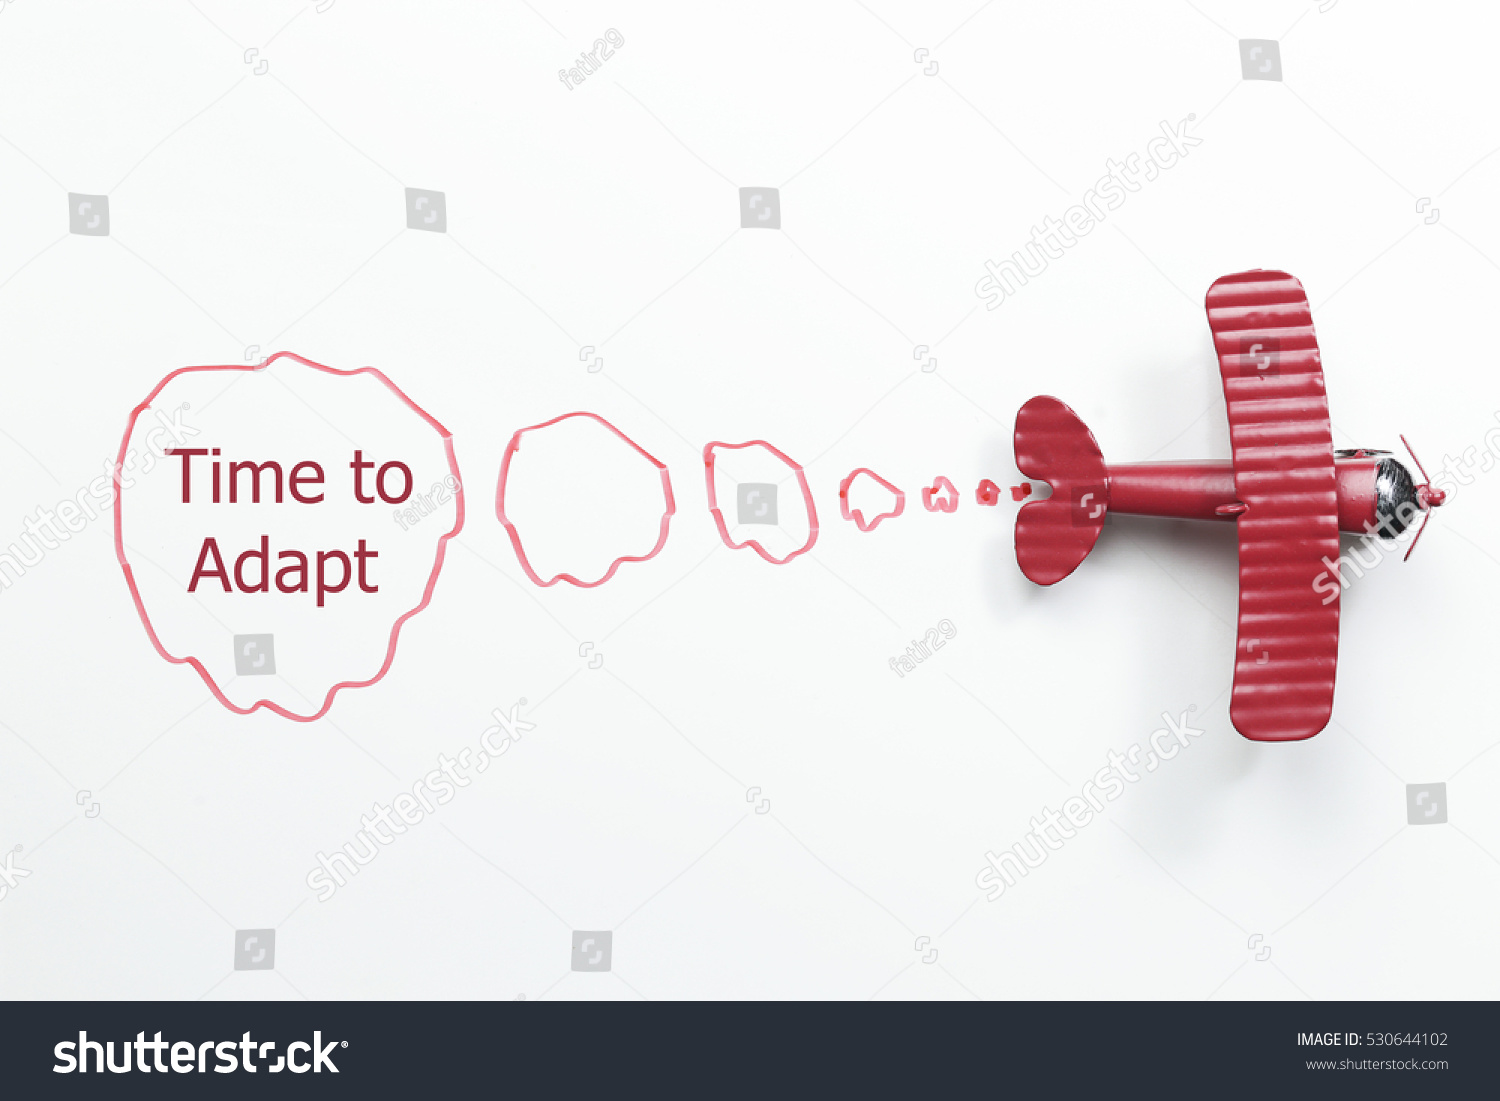 writing time to adapt red toy airplane with talk bubble on white background #530644102